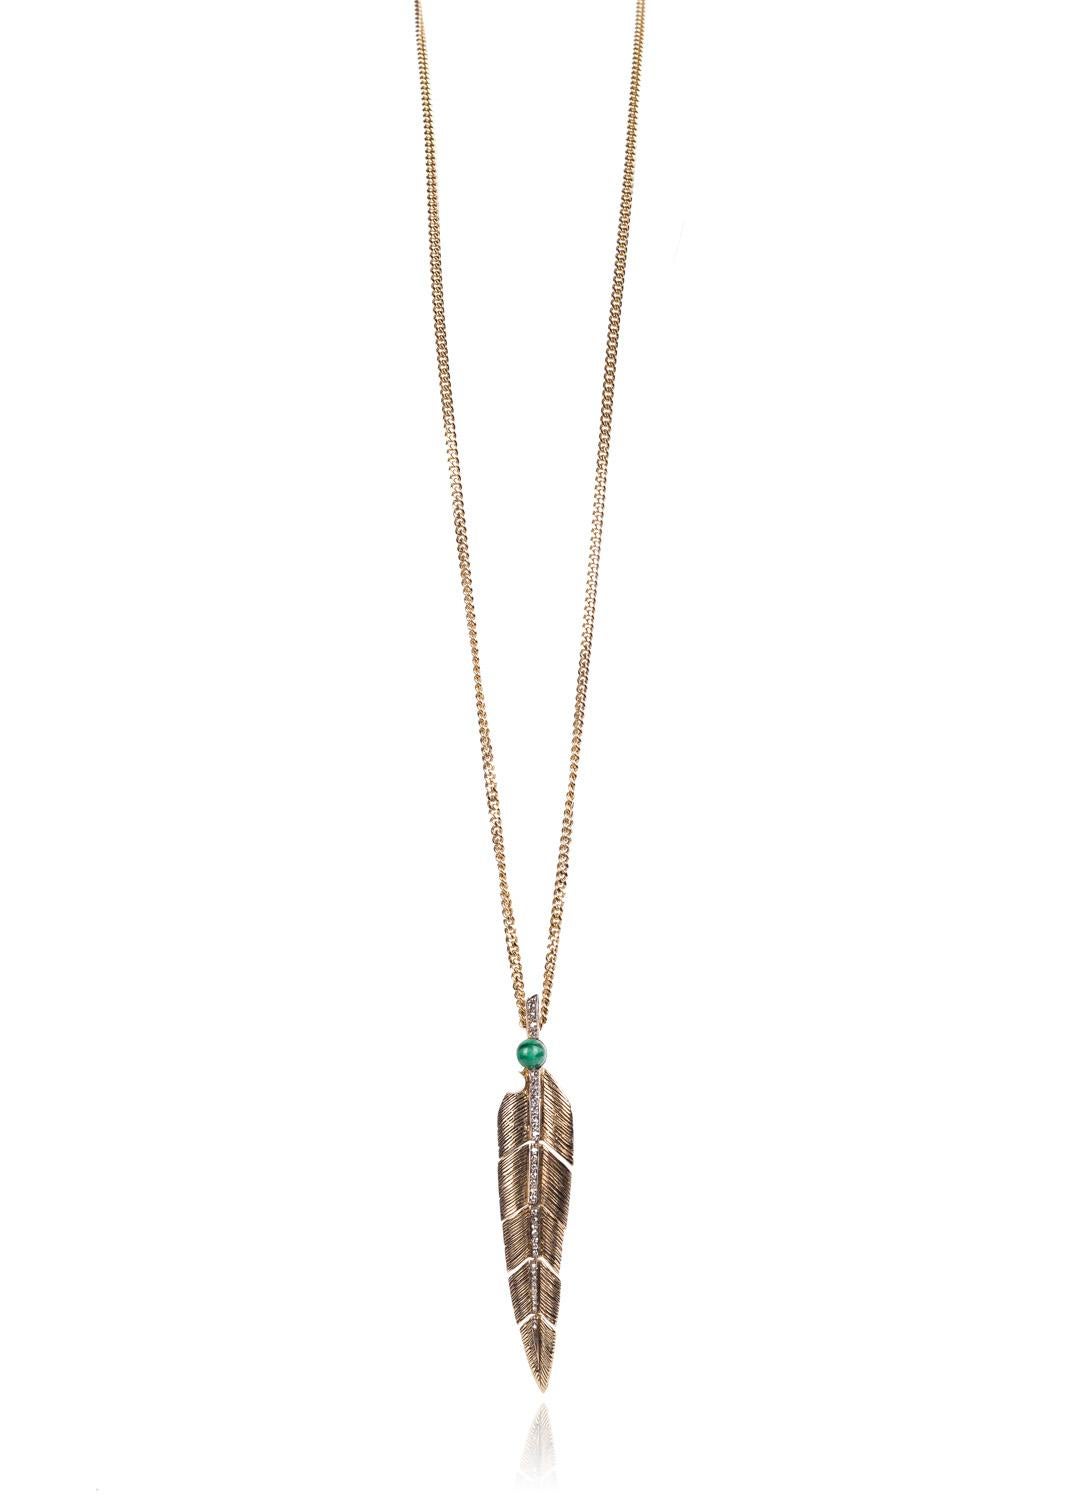 Start your spring off right with your Roberto Cavalli Feather Necklace. This rare piece features a flexible metal engraved feather, swarovski lined rachis, and luxe micro Cuban linked chains. You can slip this necklace on with almost any ensemble